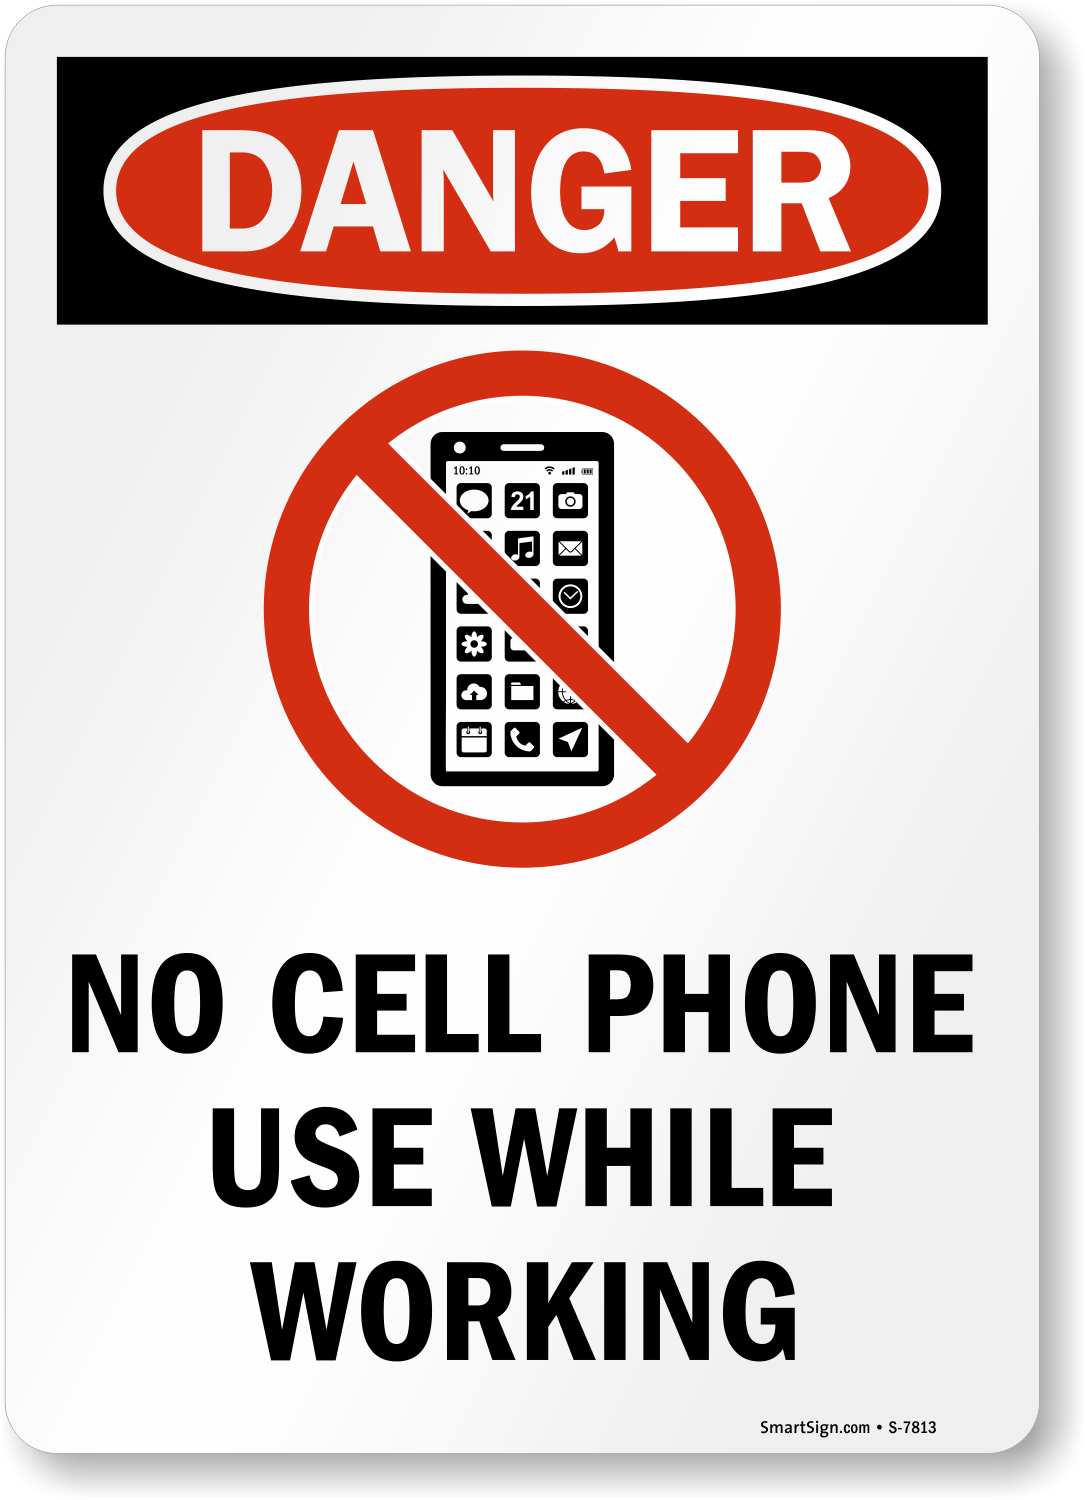 no cell phone policy at work sign